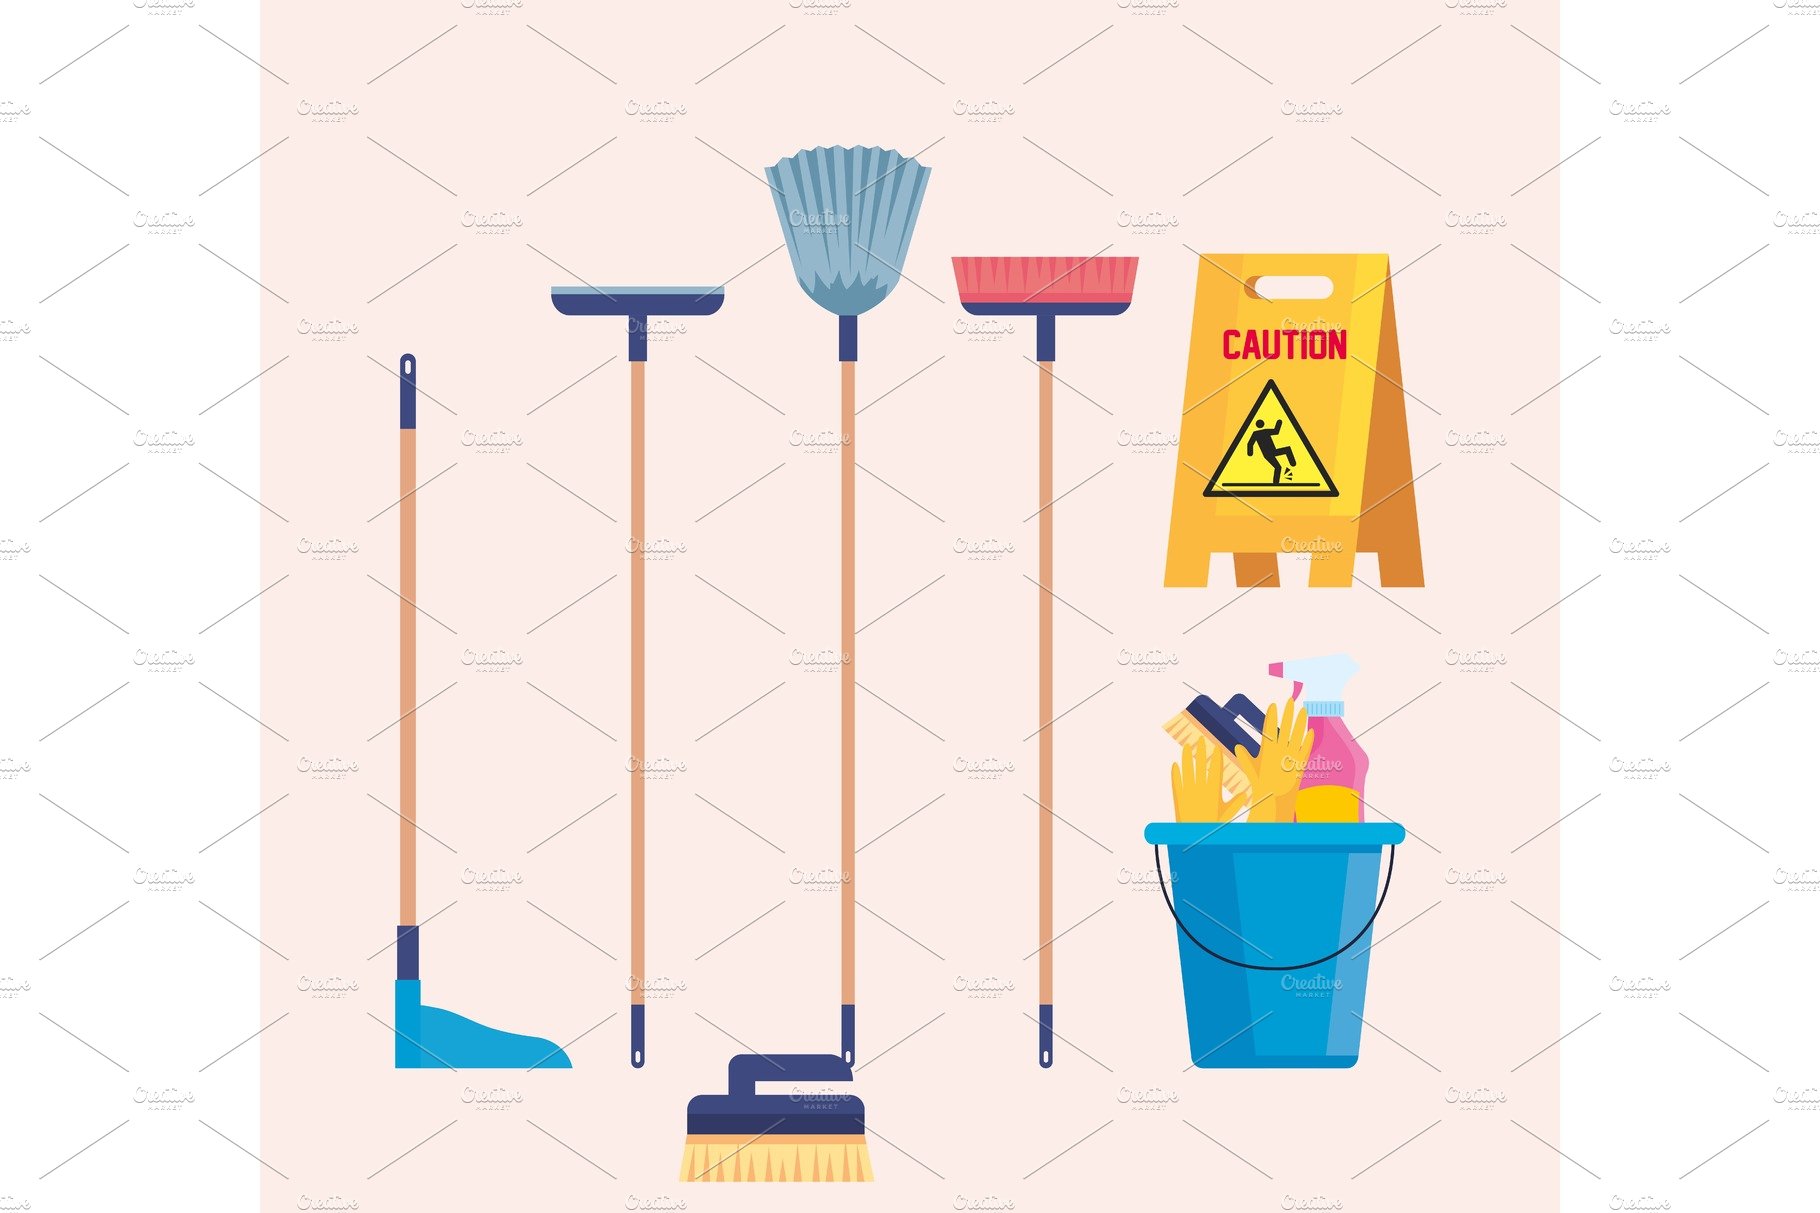 set of cleaning supplies icons cover image.